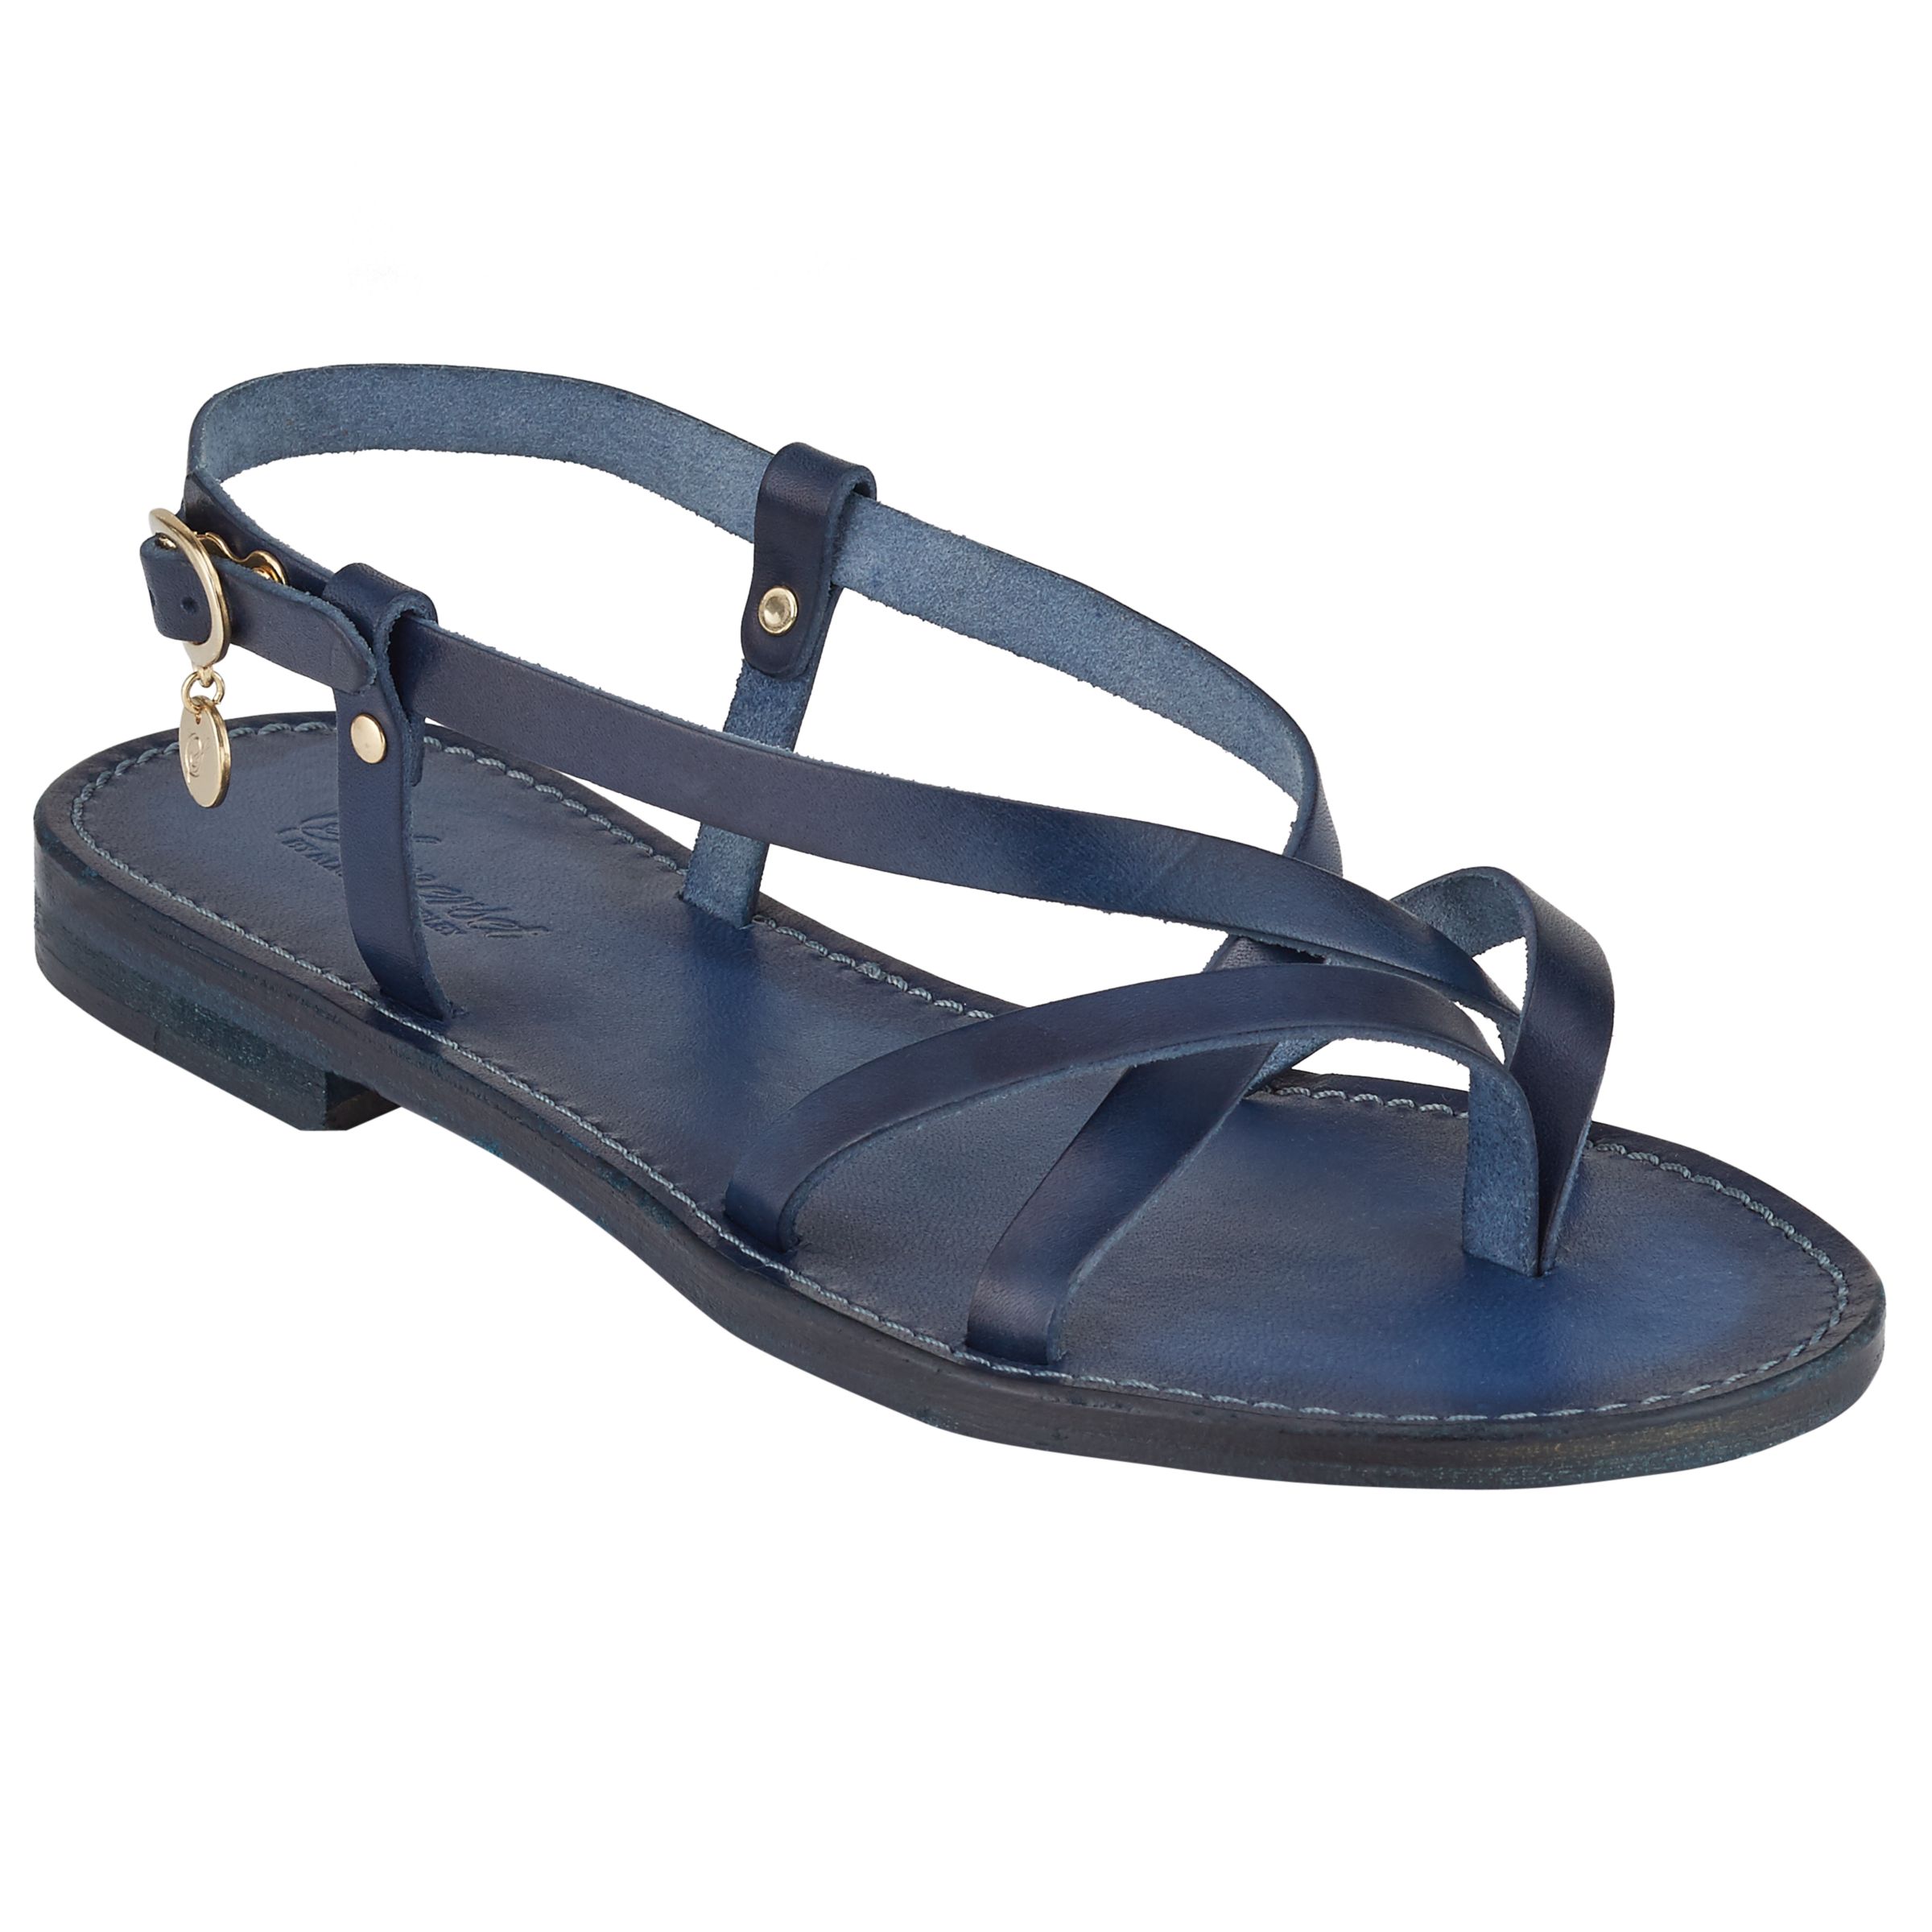 Somerset by Alice Temperley Loxton Sandals, Navy, 5